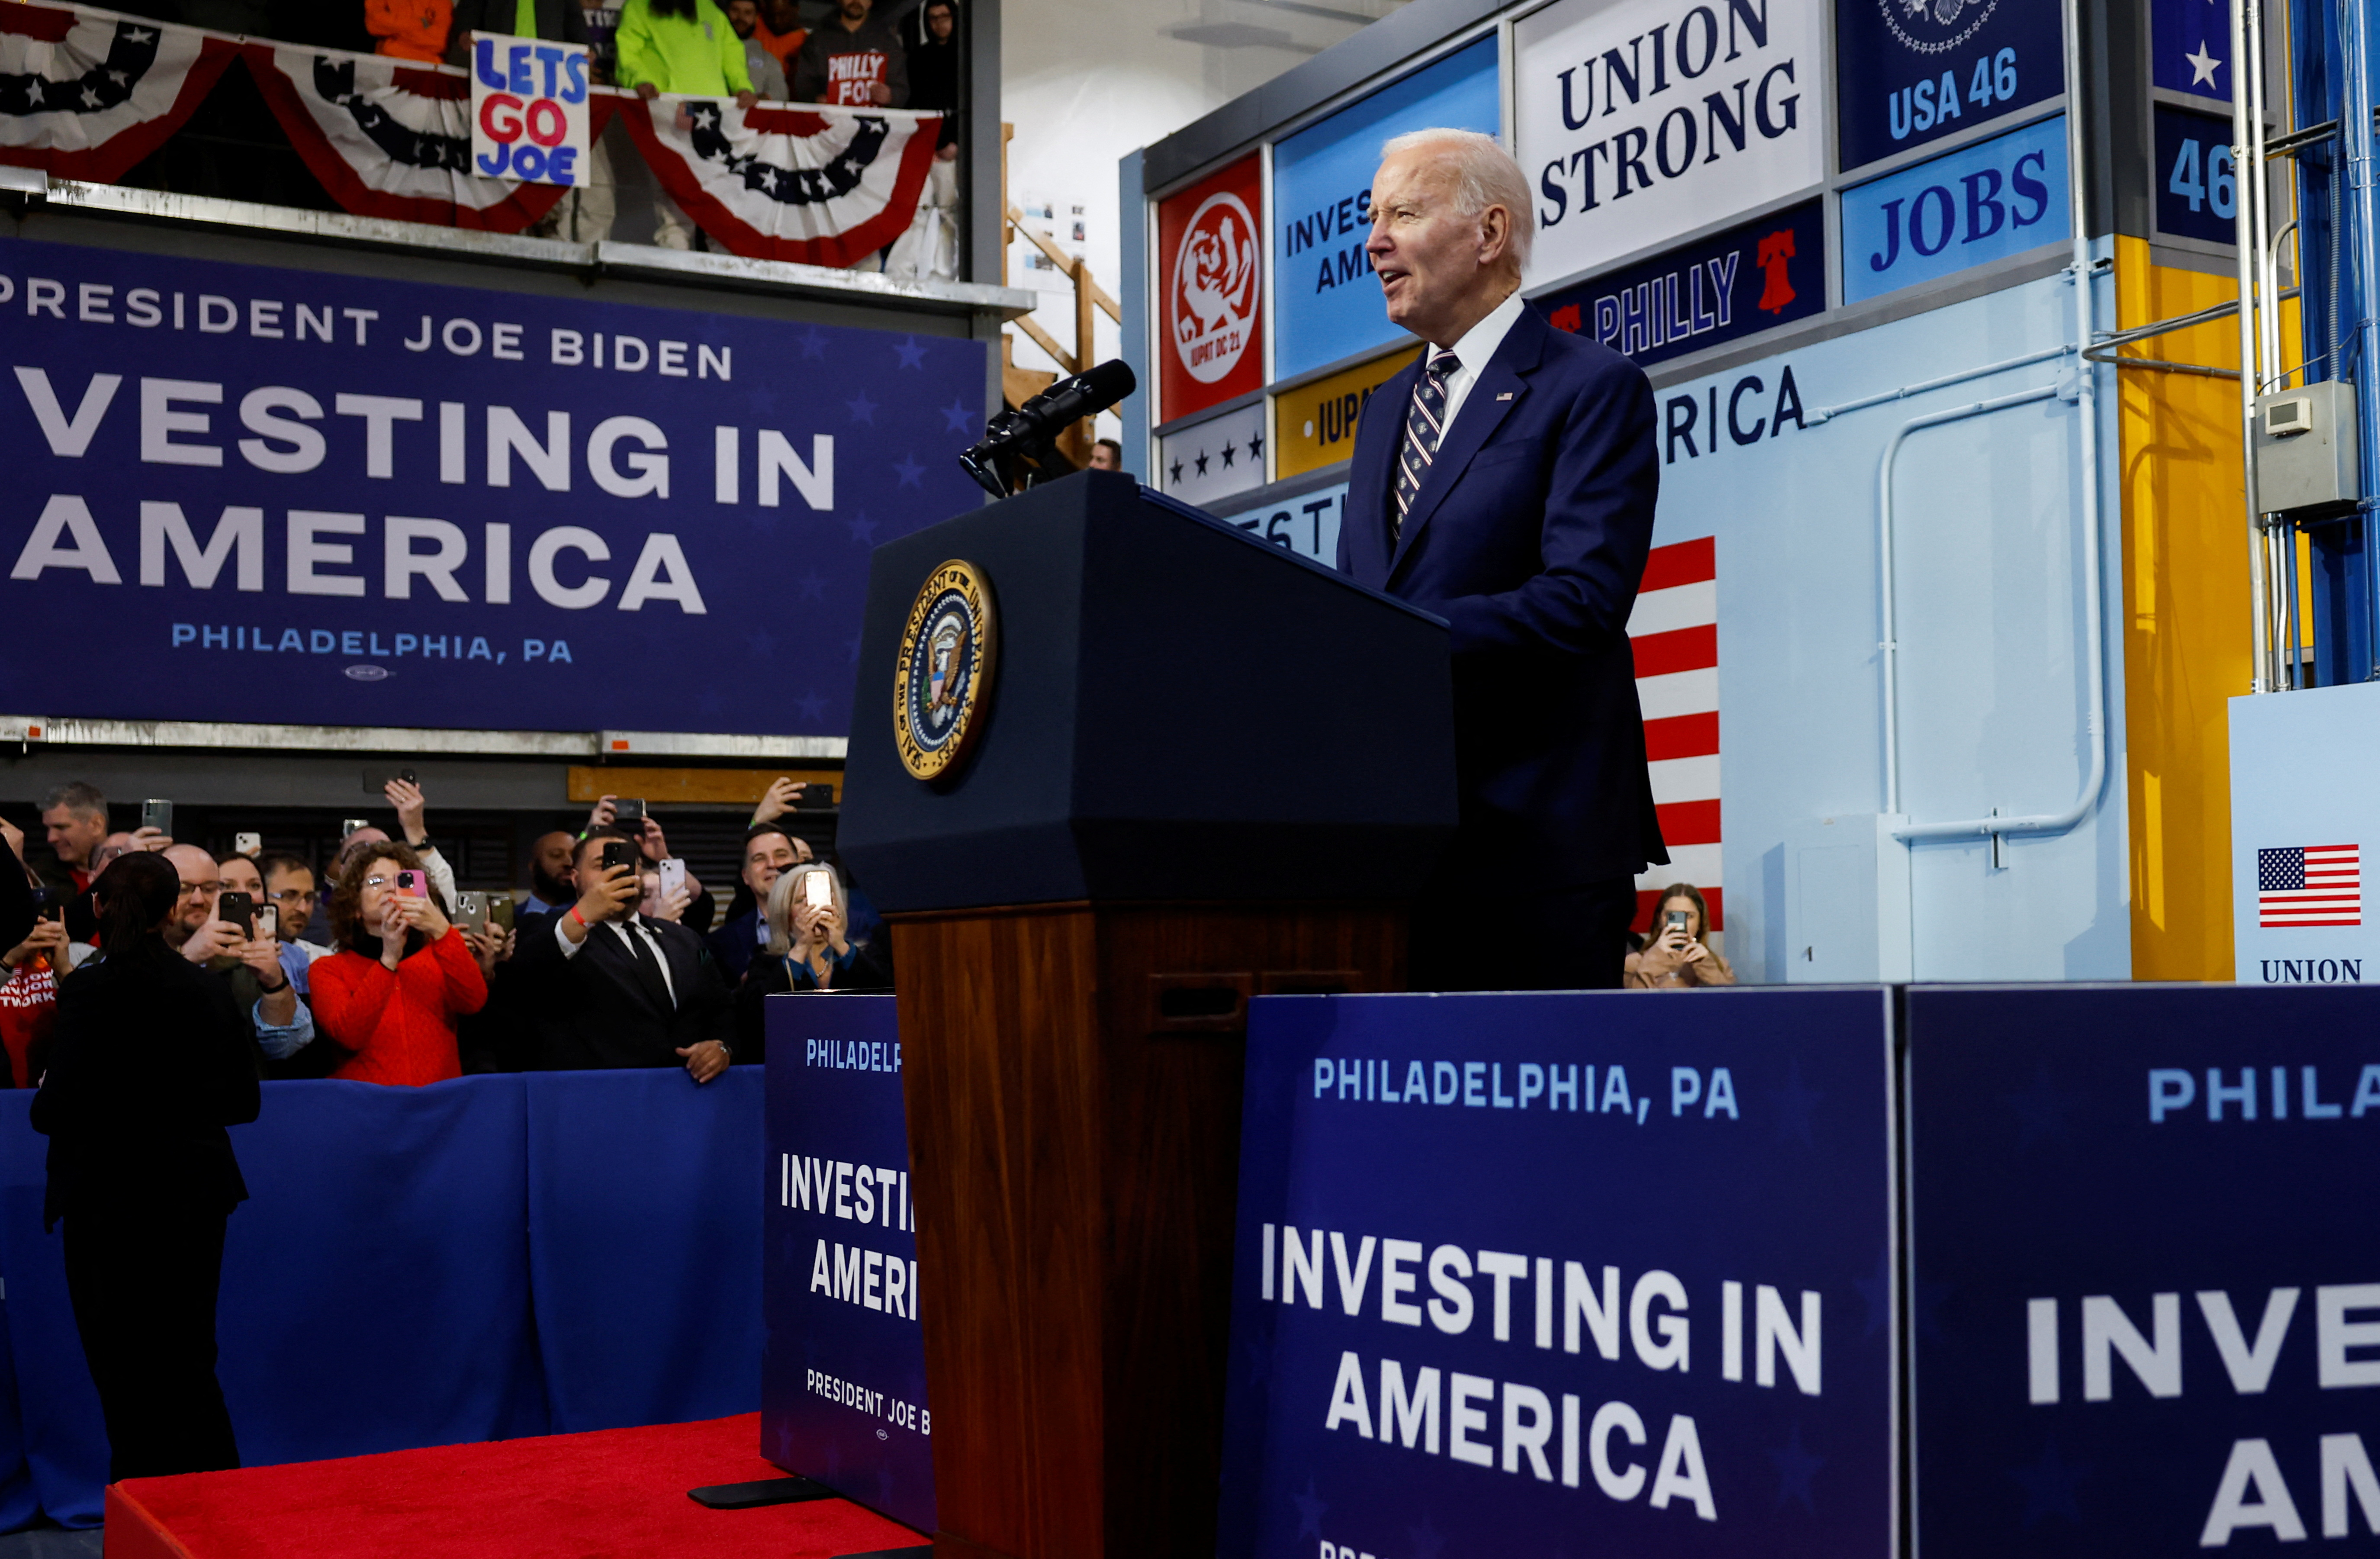 President Biden's 2024 budget proposal and Africa